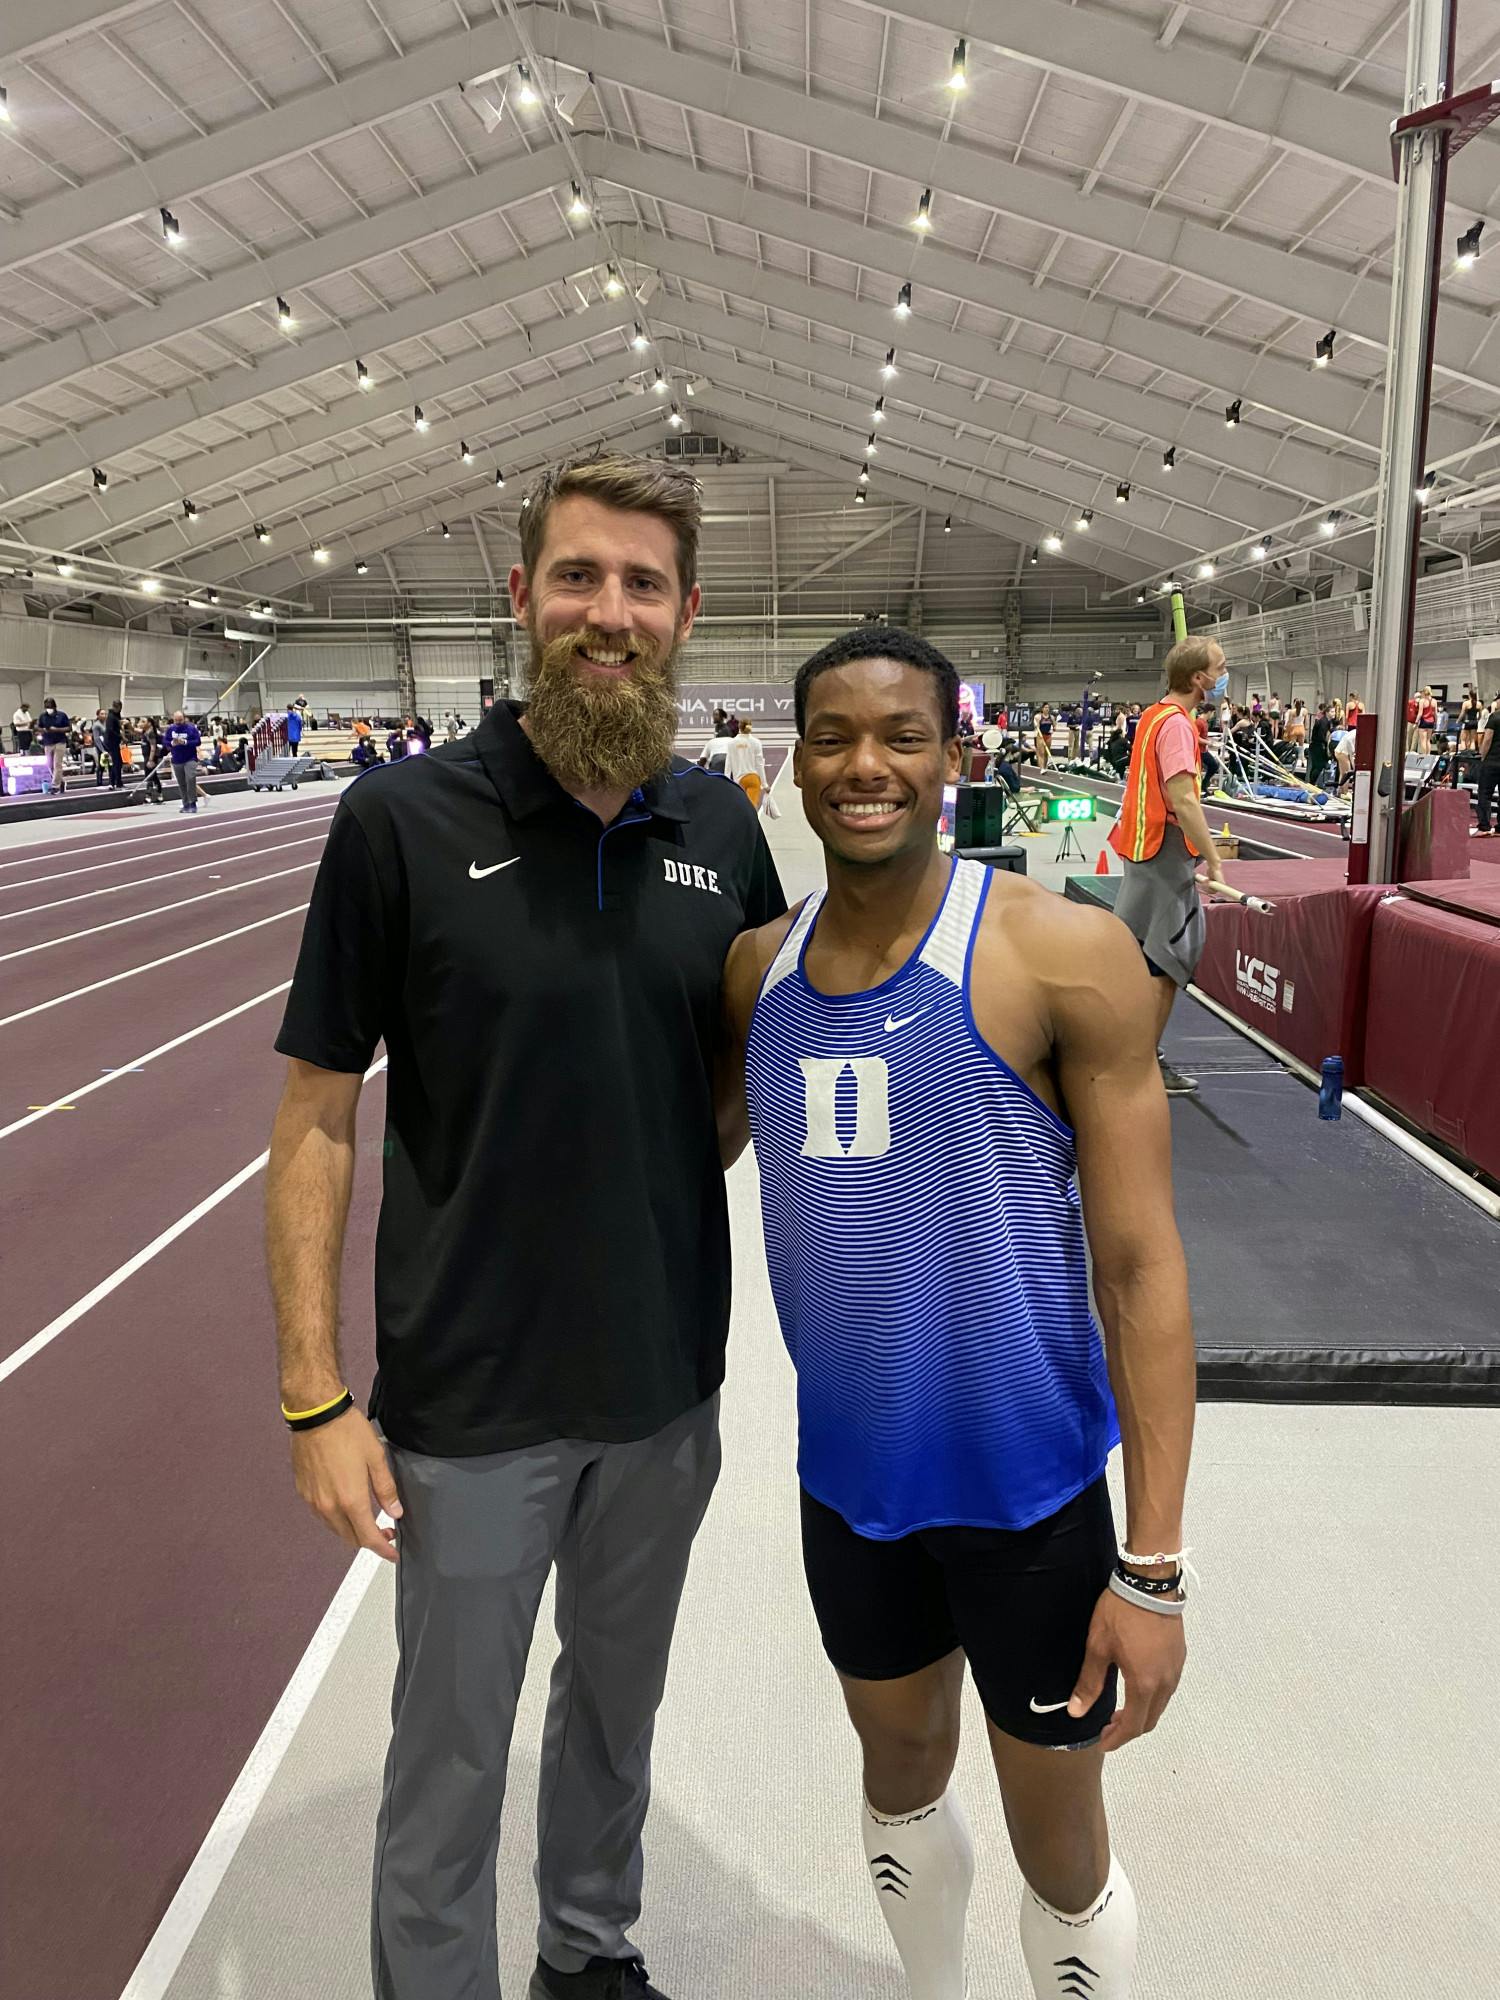 Graduate student Donovan Spearman broke the school record in the 60m dash this weekend. 